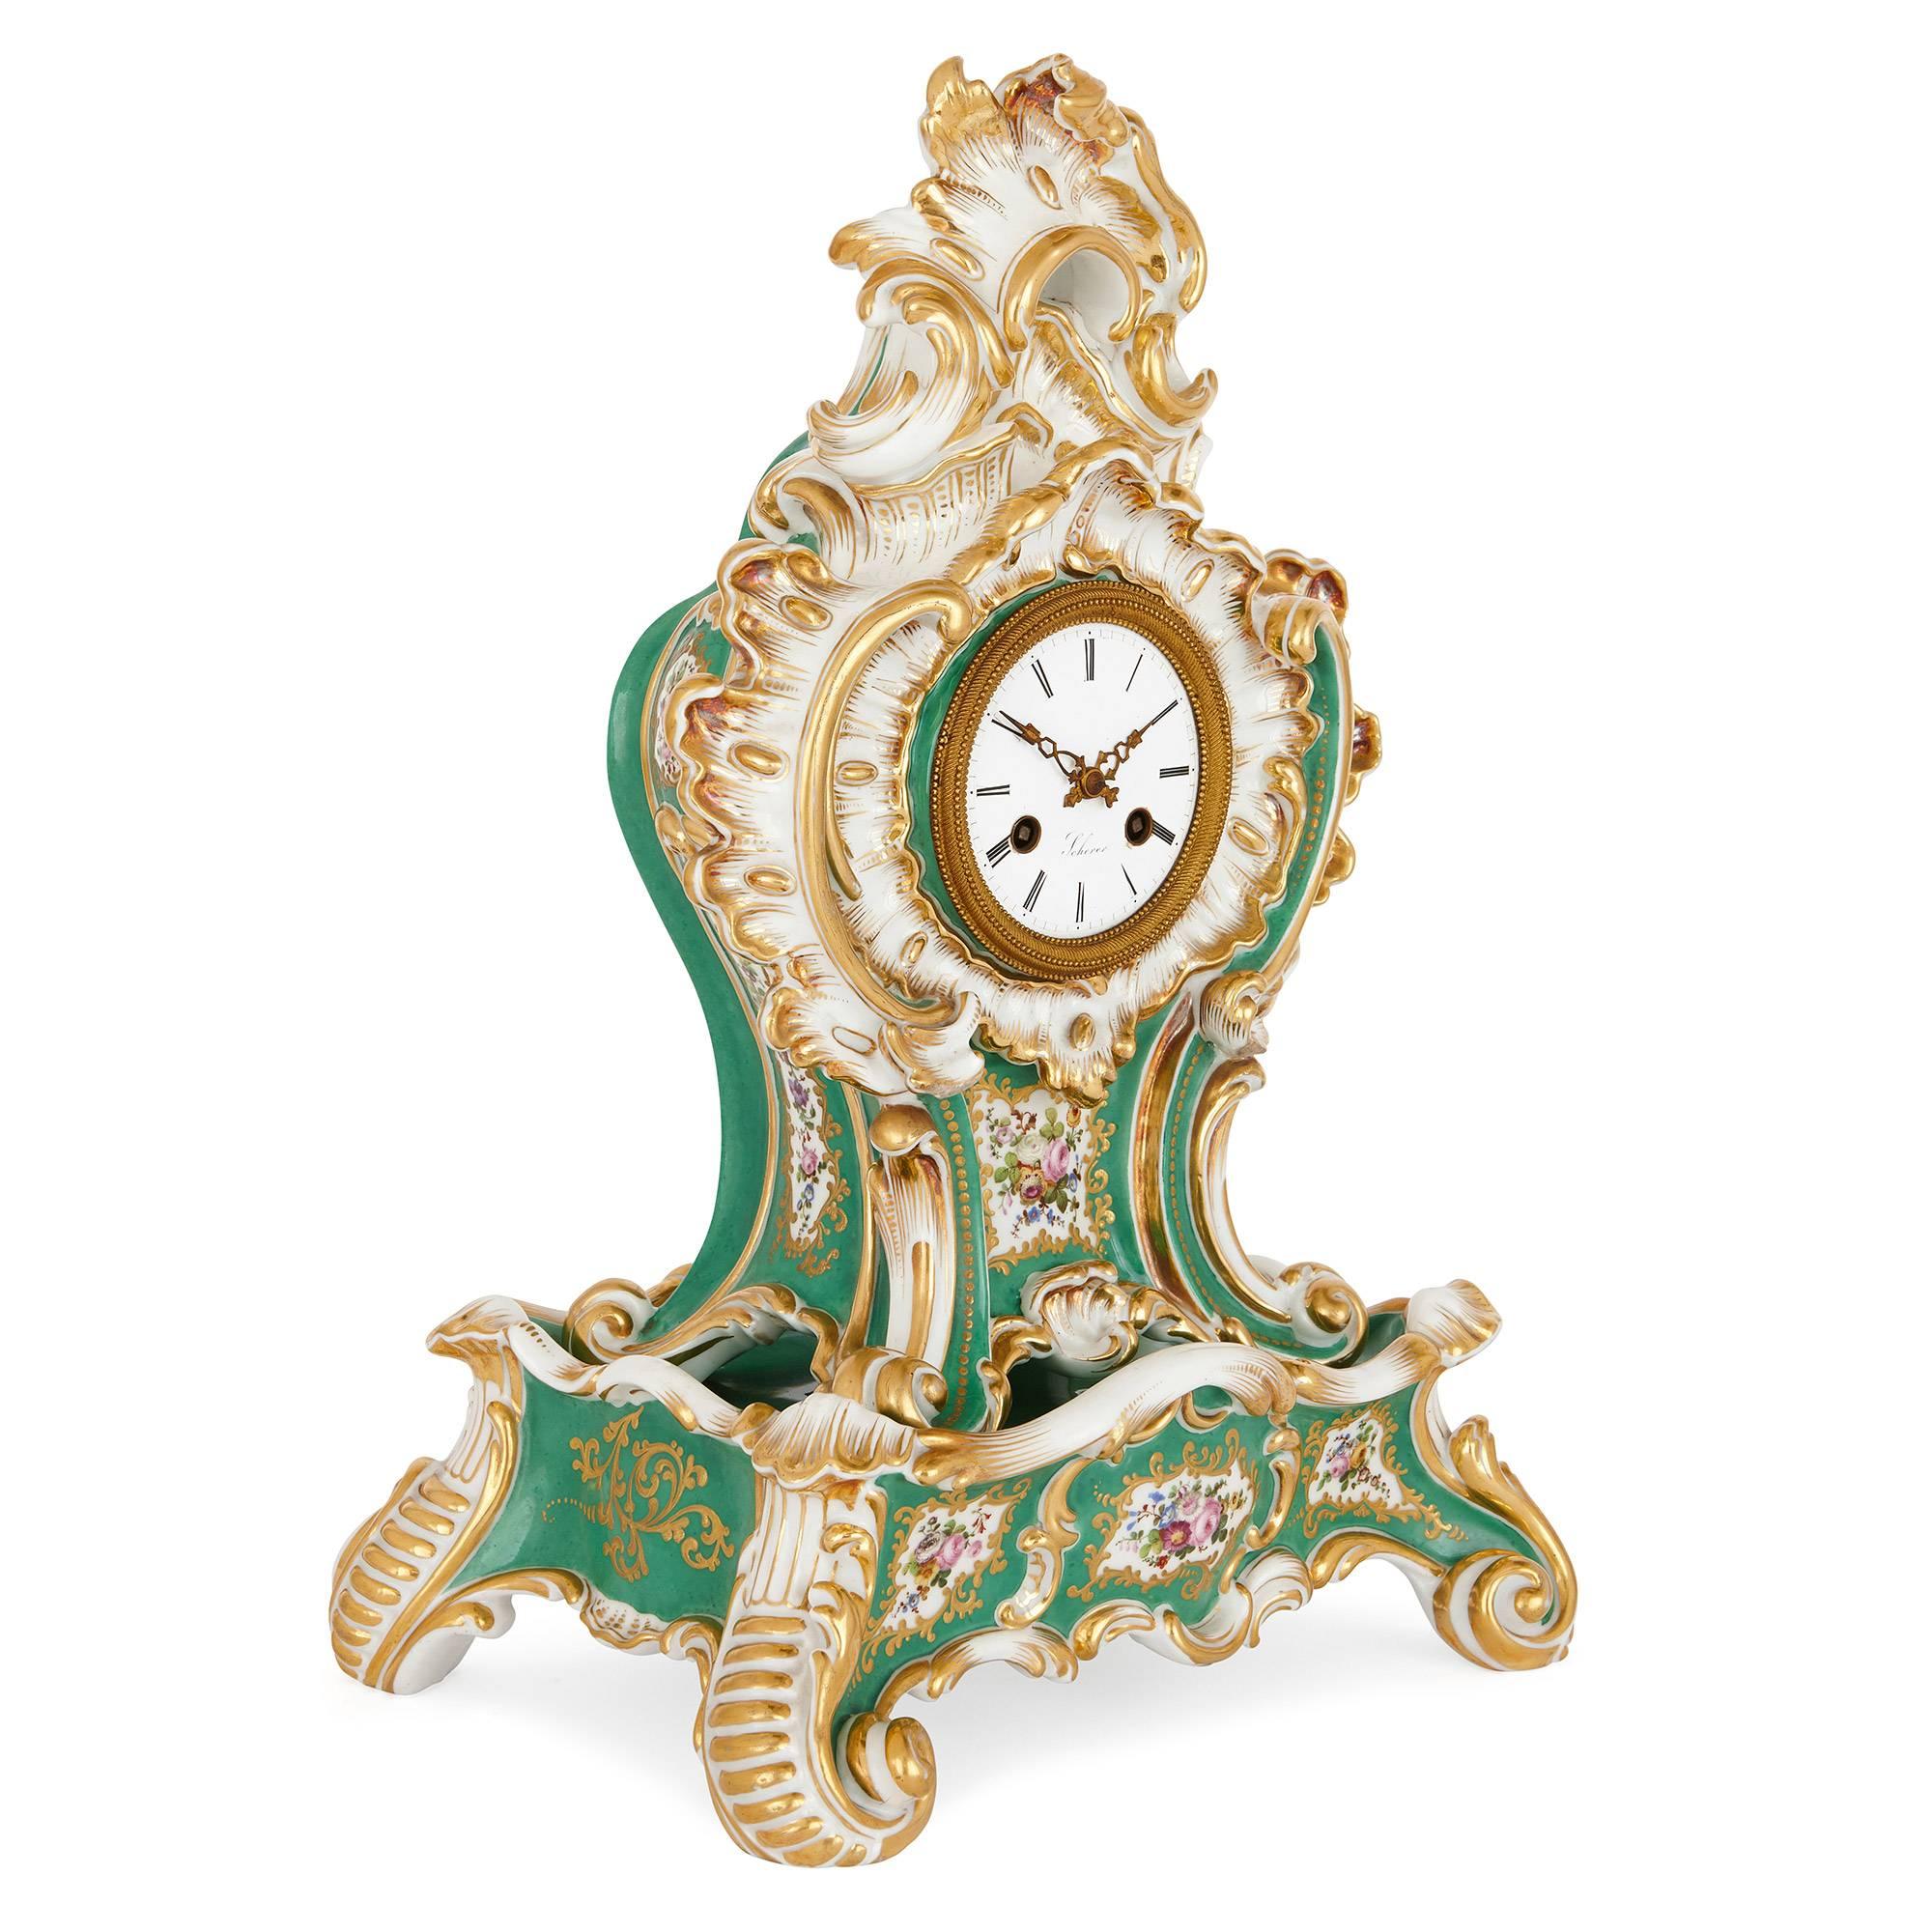 This antique porcelain mantel clock demonstrates the 19th century nostalgia for the delicately elegant decorative arts under King Louis XV, also known as the Rococo style. 

Crafted by celebrated porcelain artist Jacob Petit, this exquisite clock